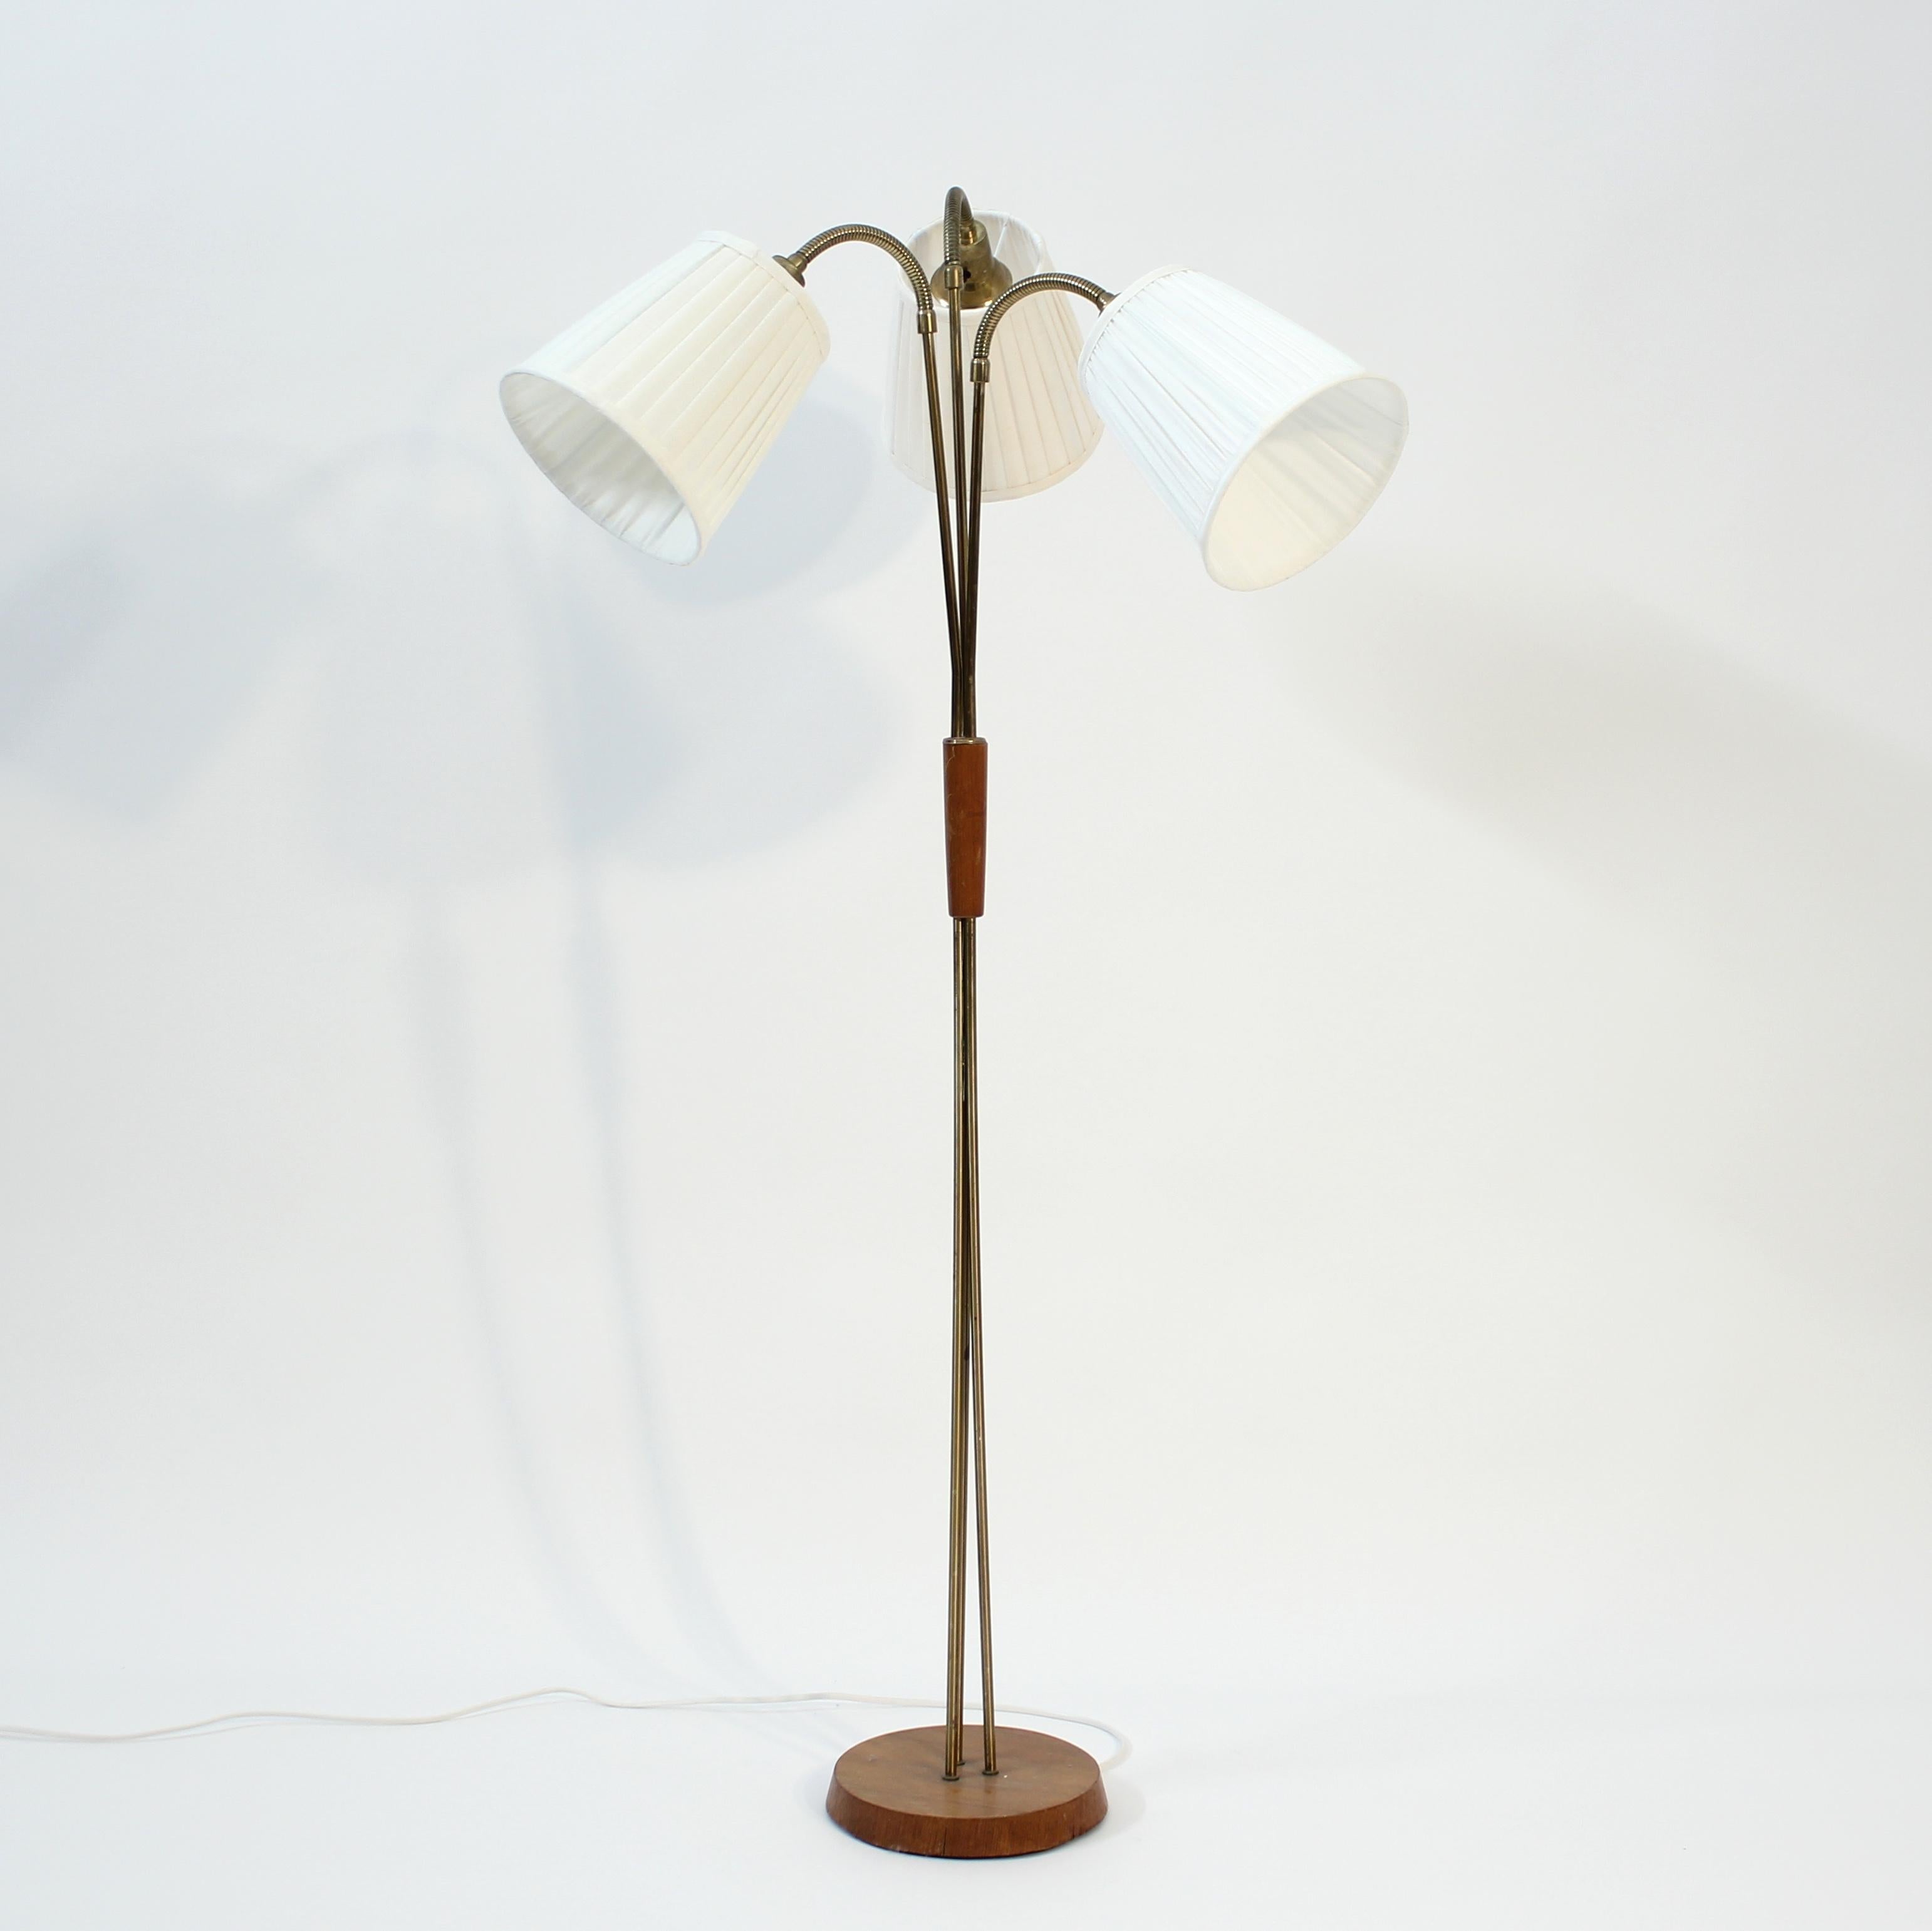 Swedish mid-century floor lamp with three adjustable swan neck light sources, mounted on three different heights. Brass stem with brass details. Fitted with three new pleated white shades. Good and honest vintage condition with light ware consistent